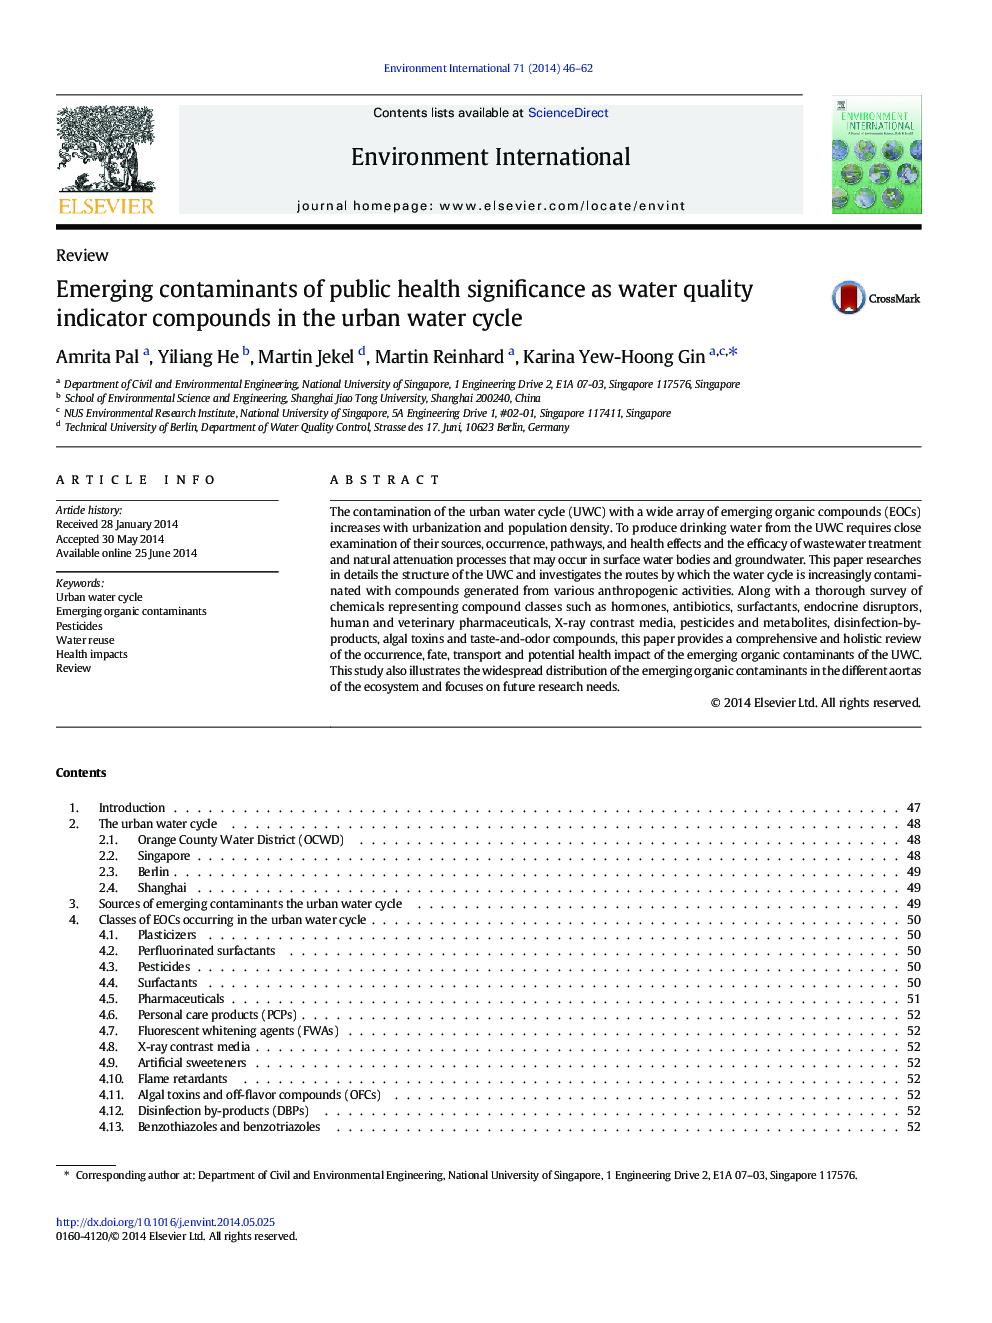 Emerging contaminants of public health significance as water quality indicator compounds in the urban water cycle